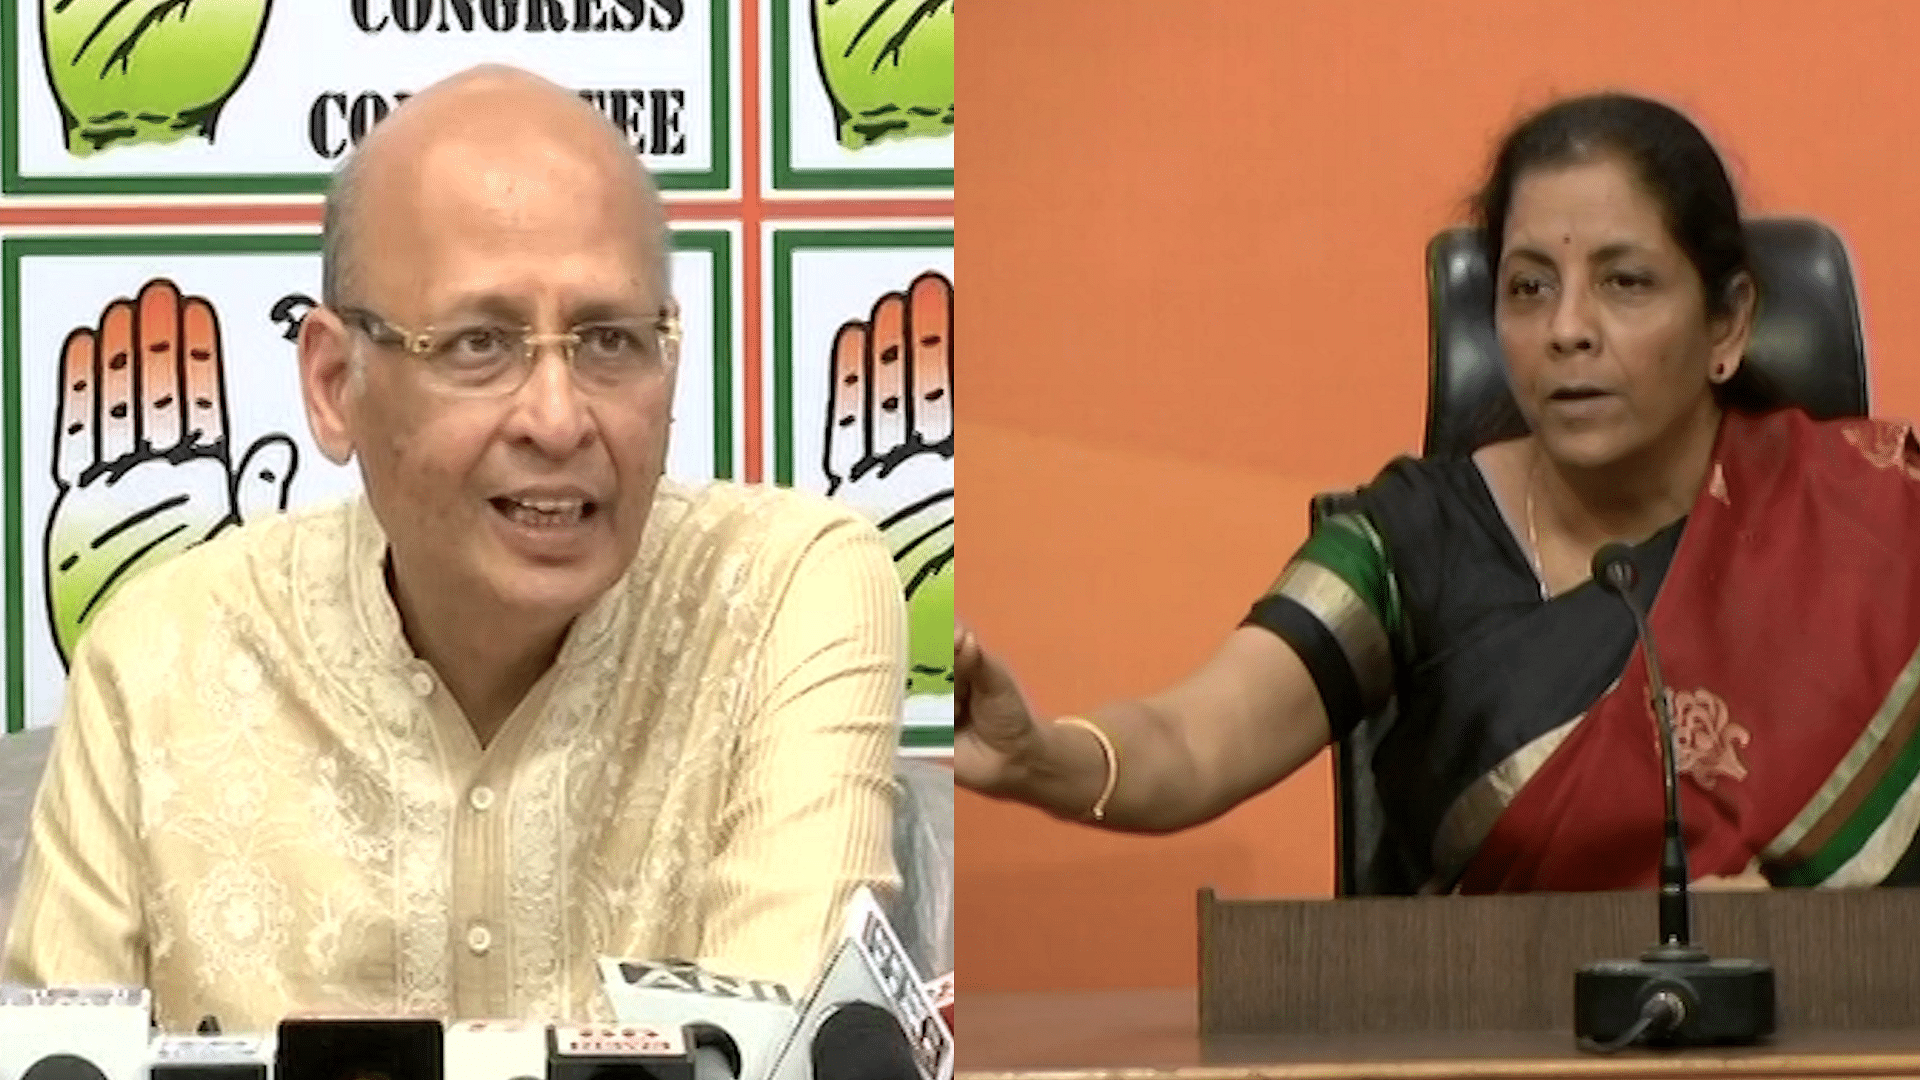 Singhvi, retaliating to Sitharaman’s allegations, said neither him nor his family were involved with Nirav Modi.